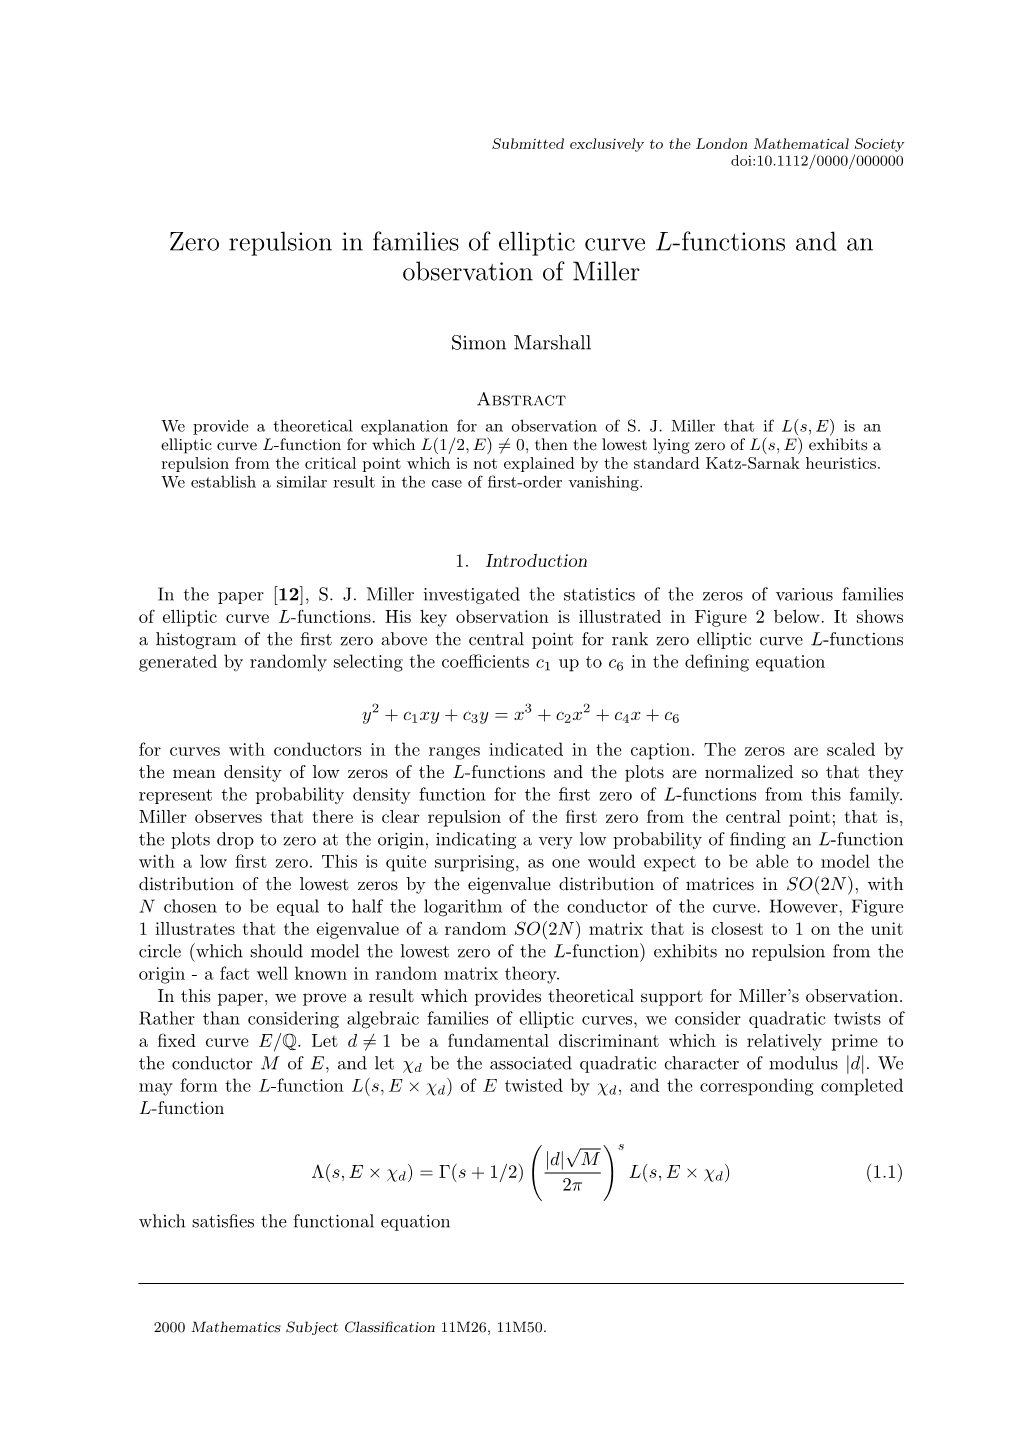 Zero Repulsion in Families of Elliptic Curve L-Functions and an Observation of Miller